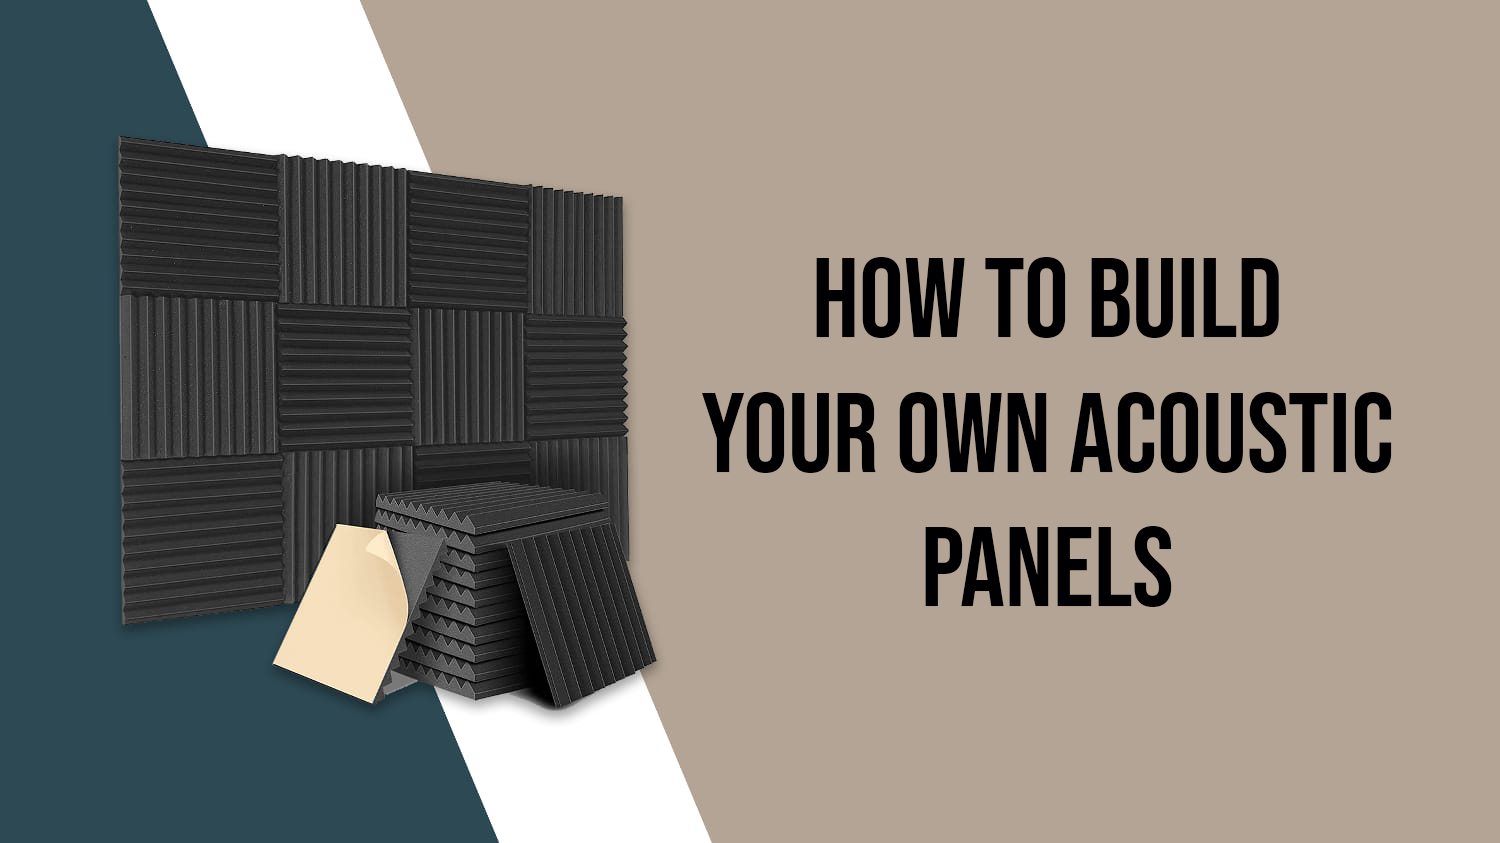 How to build your own acoustic panel